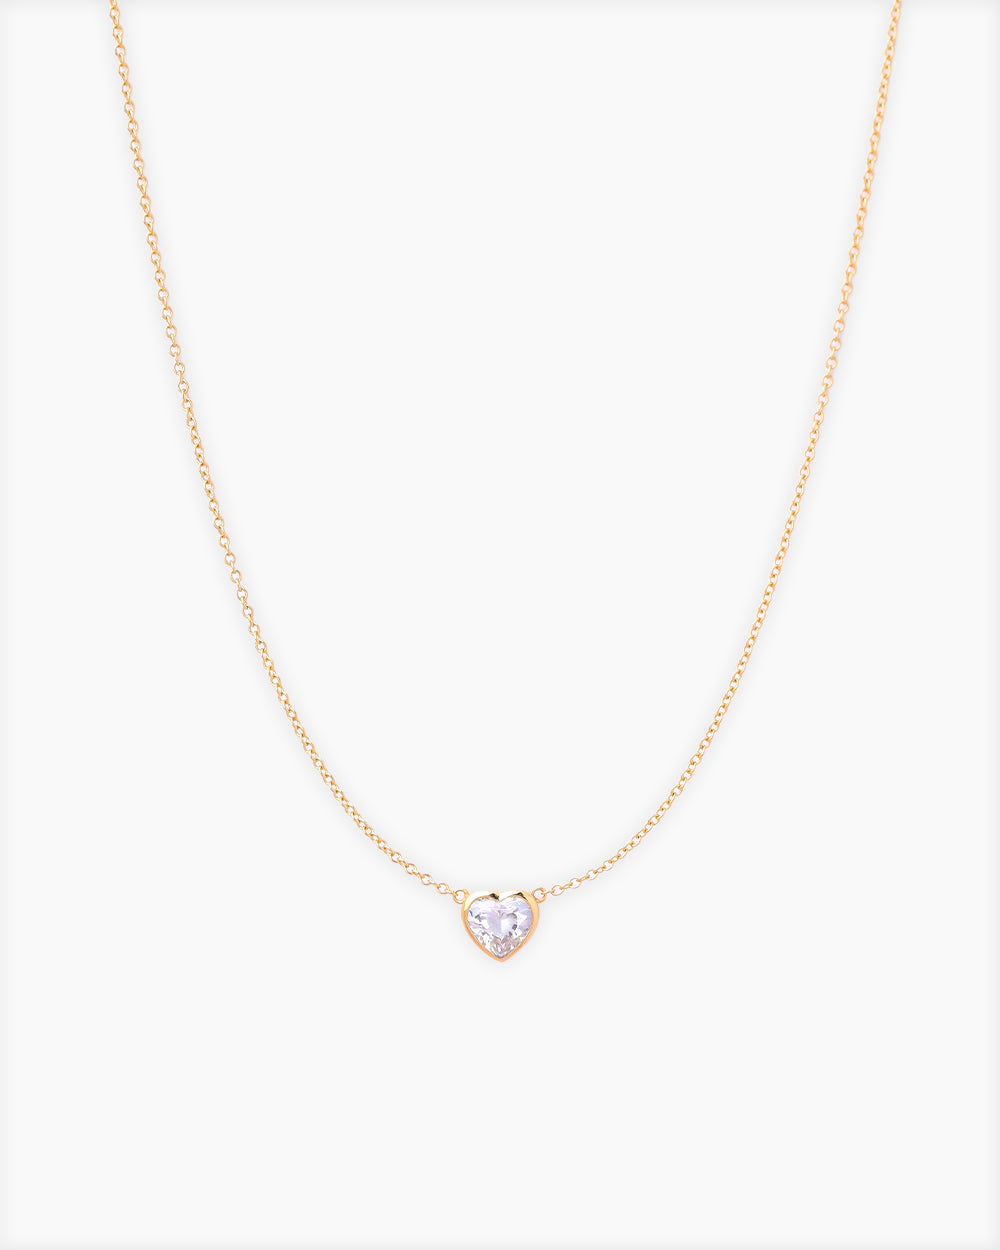 Sally Gold Necklace